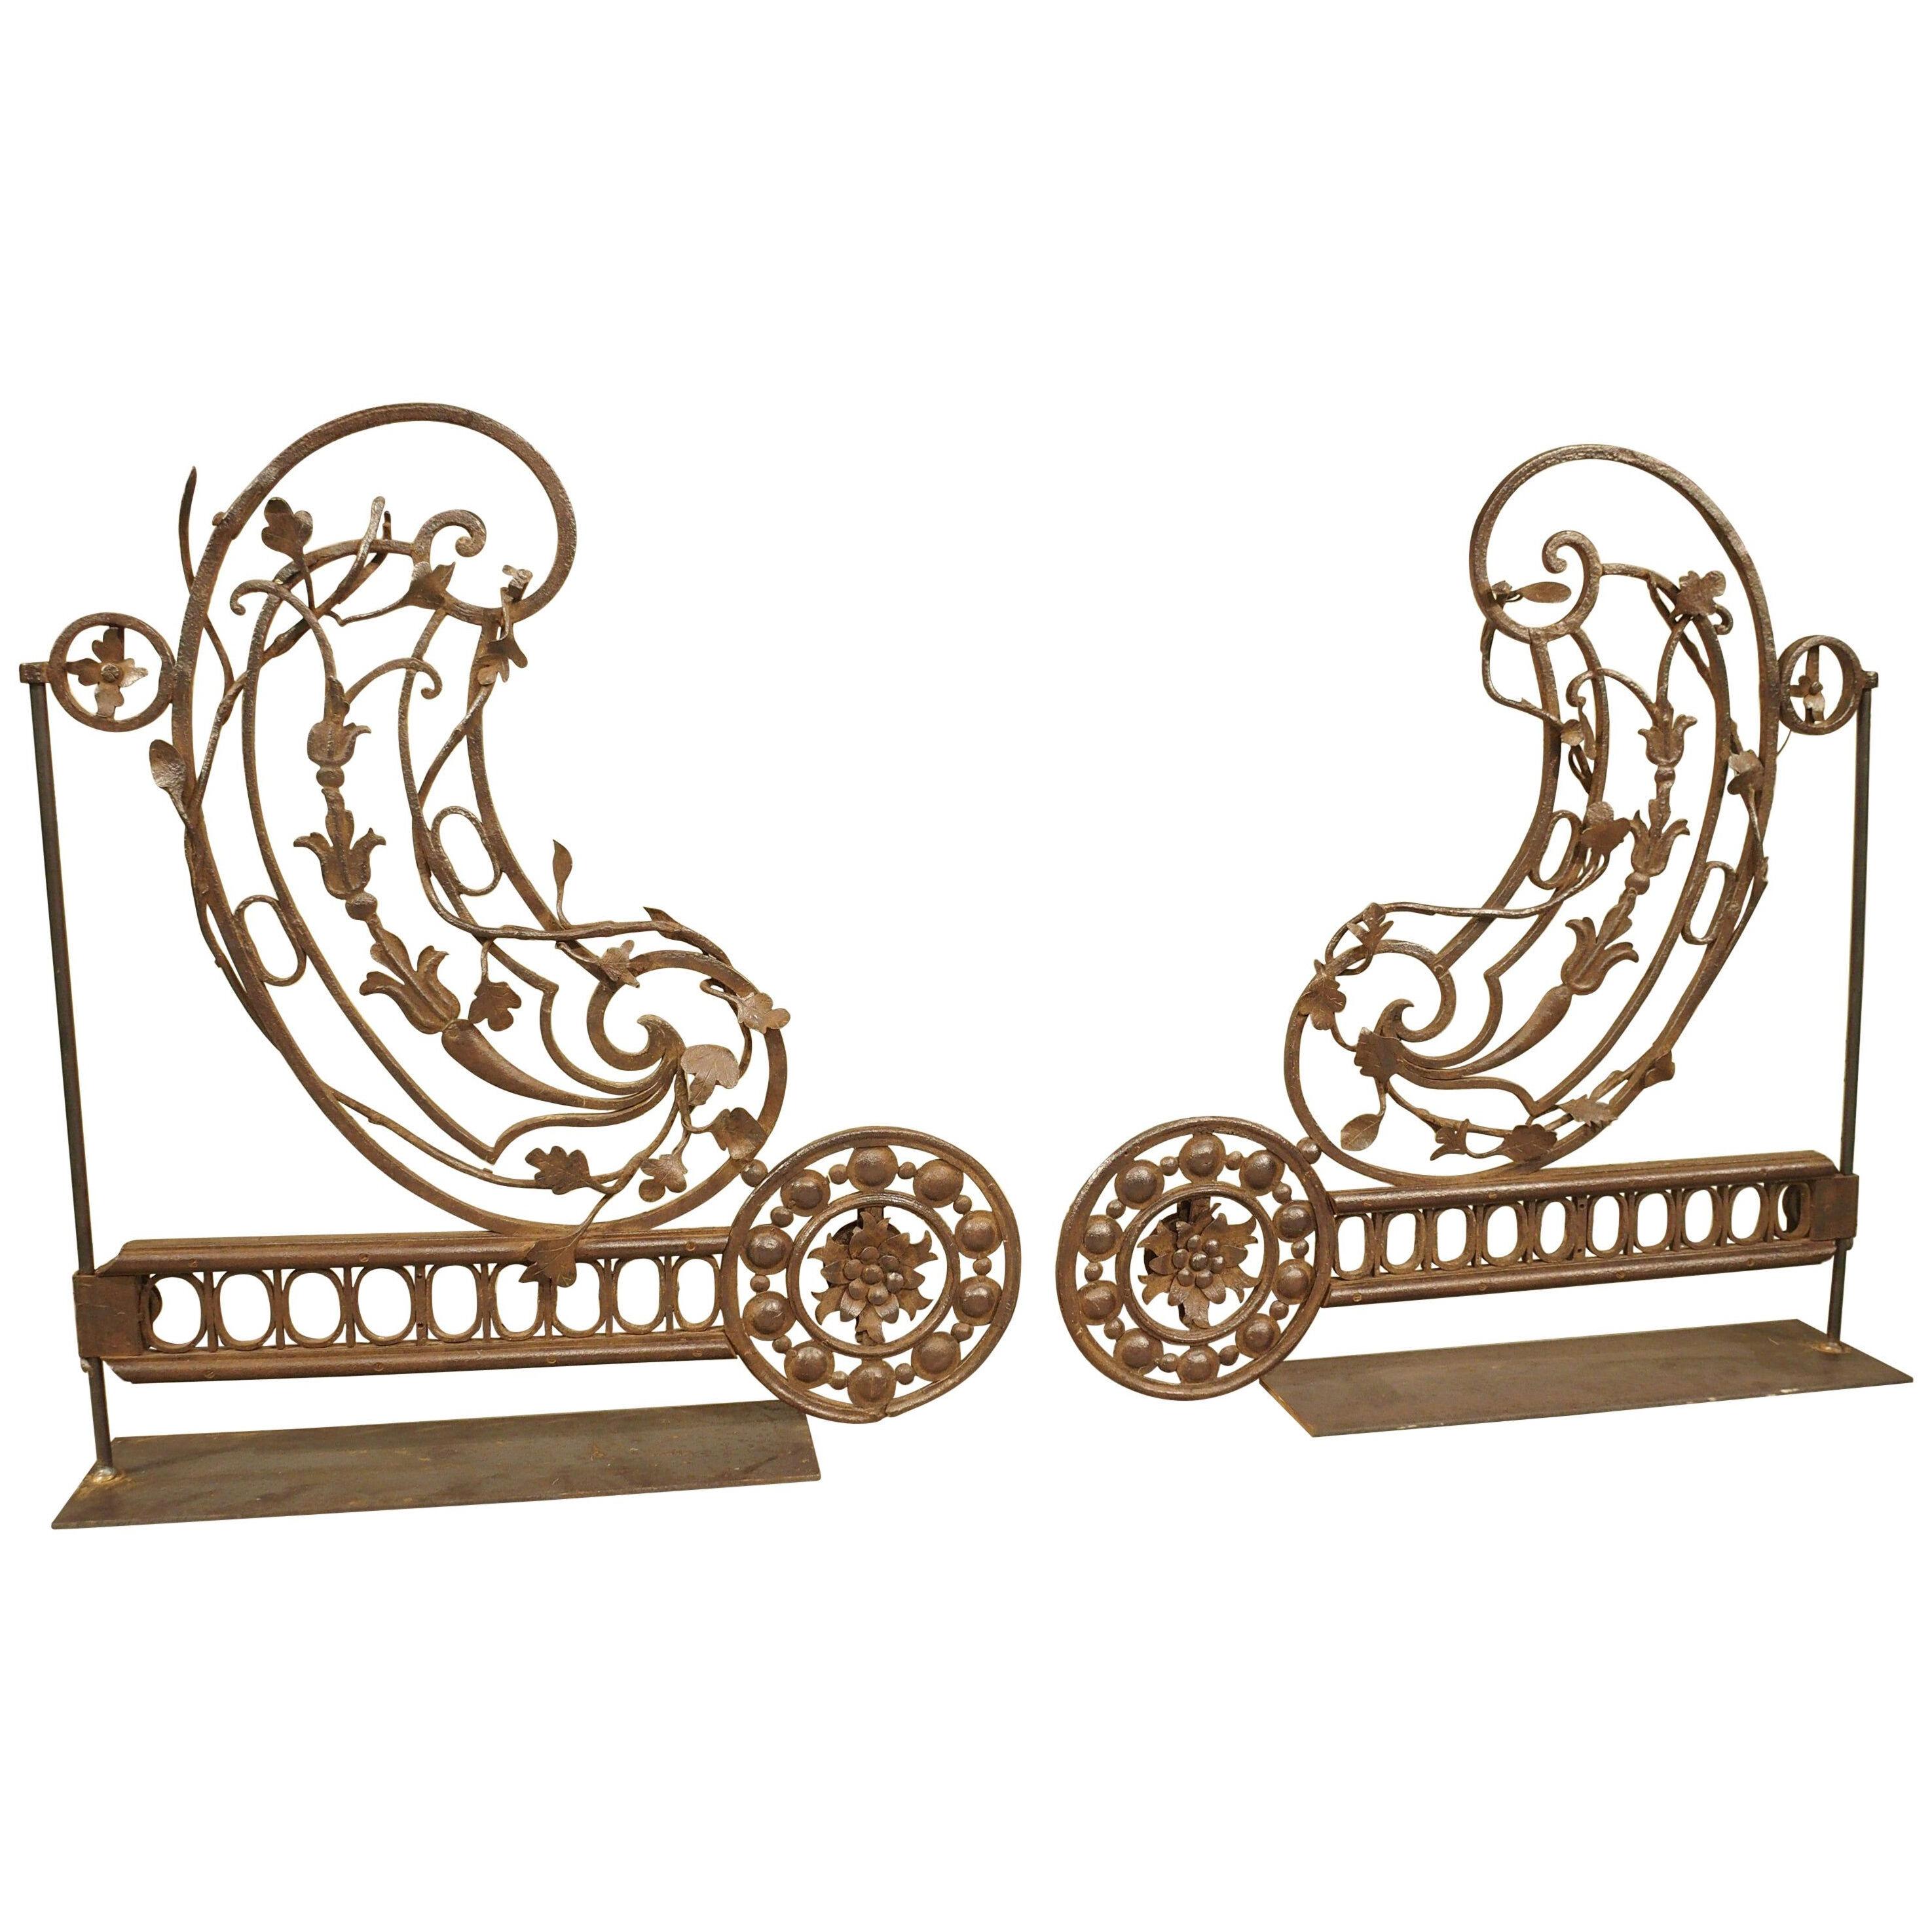 Unusual Pair of Mounted 18th Century Wrought Iron Brackets from France